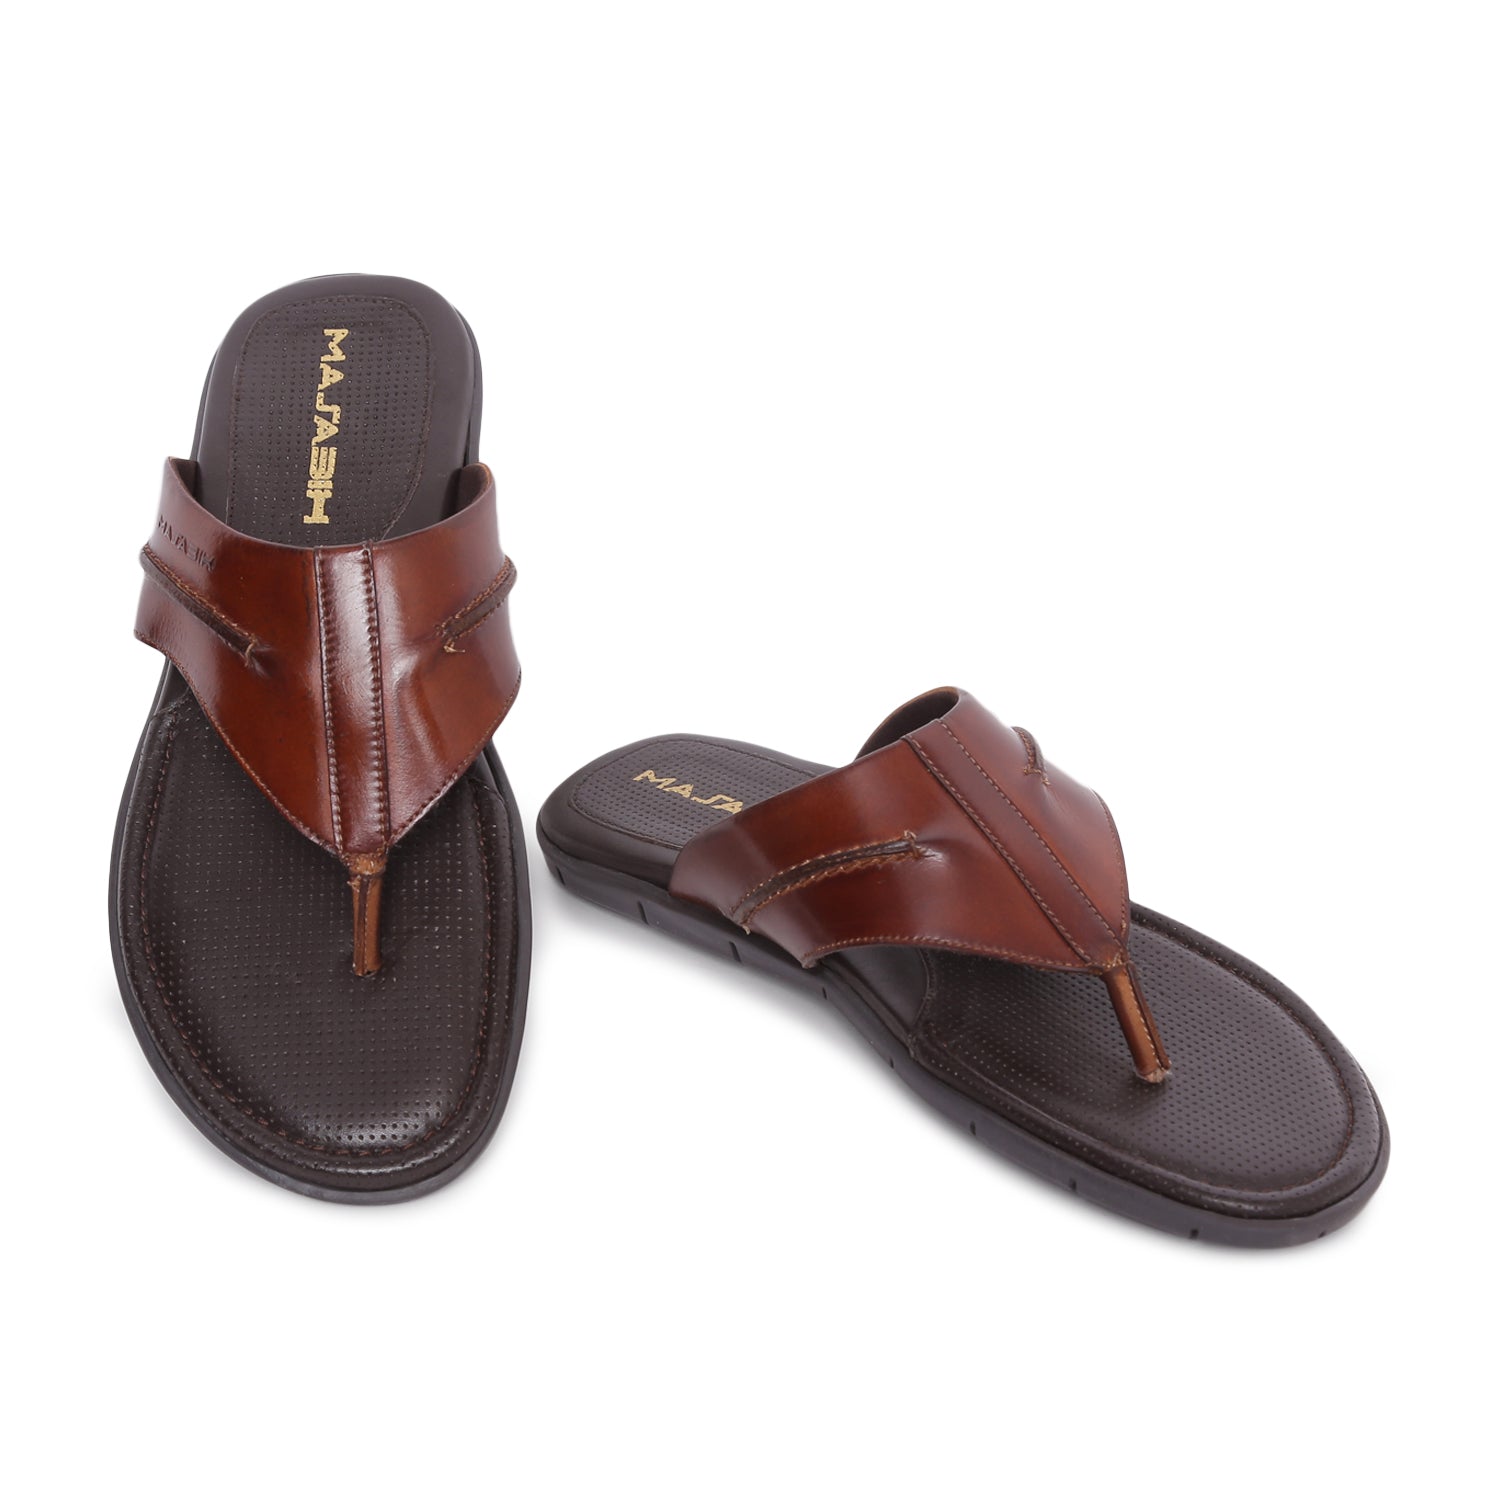 MASABIH Geniune Leather Soft Tan Color modern tauro thong sandals for Mens